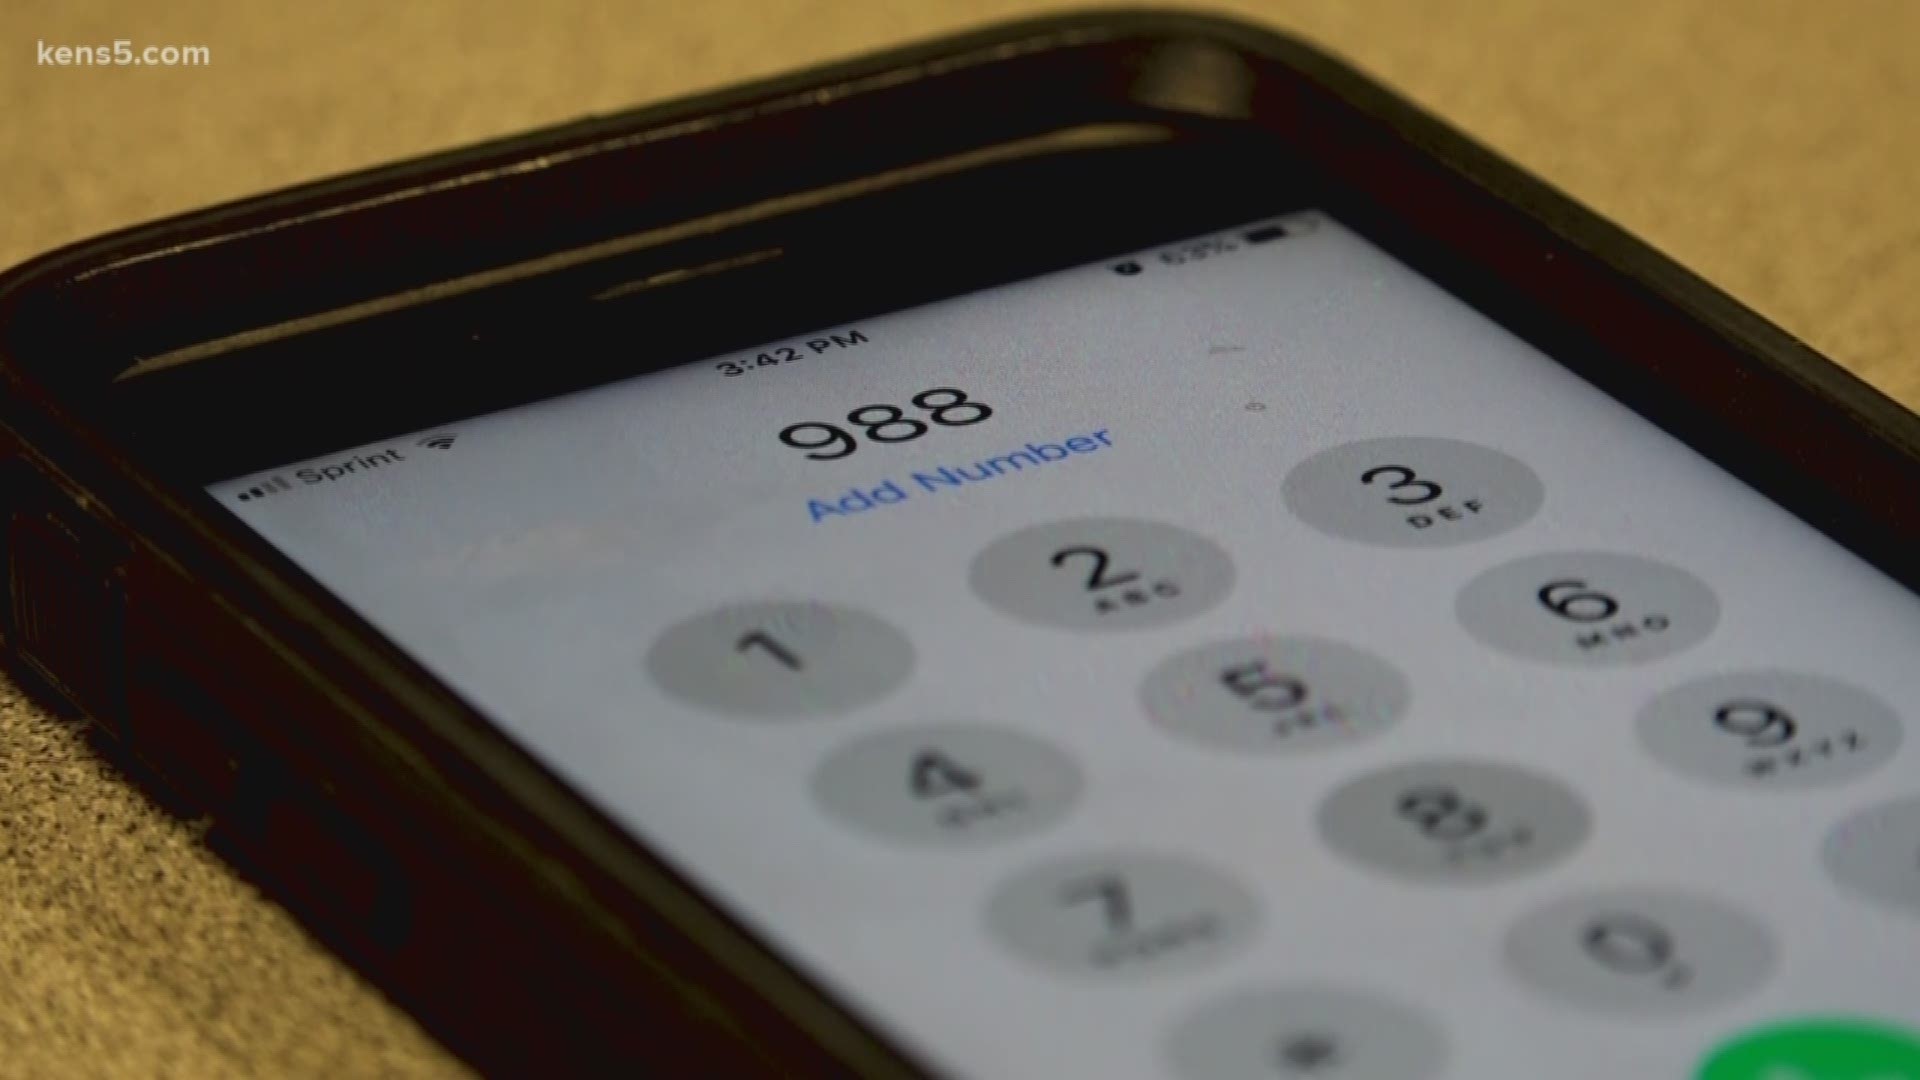 Like 9-1-1, you'll soon be able to dial a three-digit number to get help for someone looking to end their life.